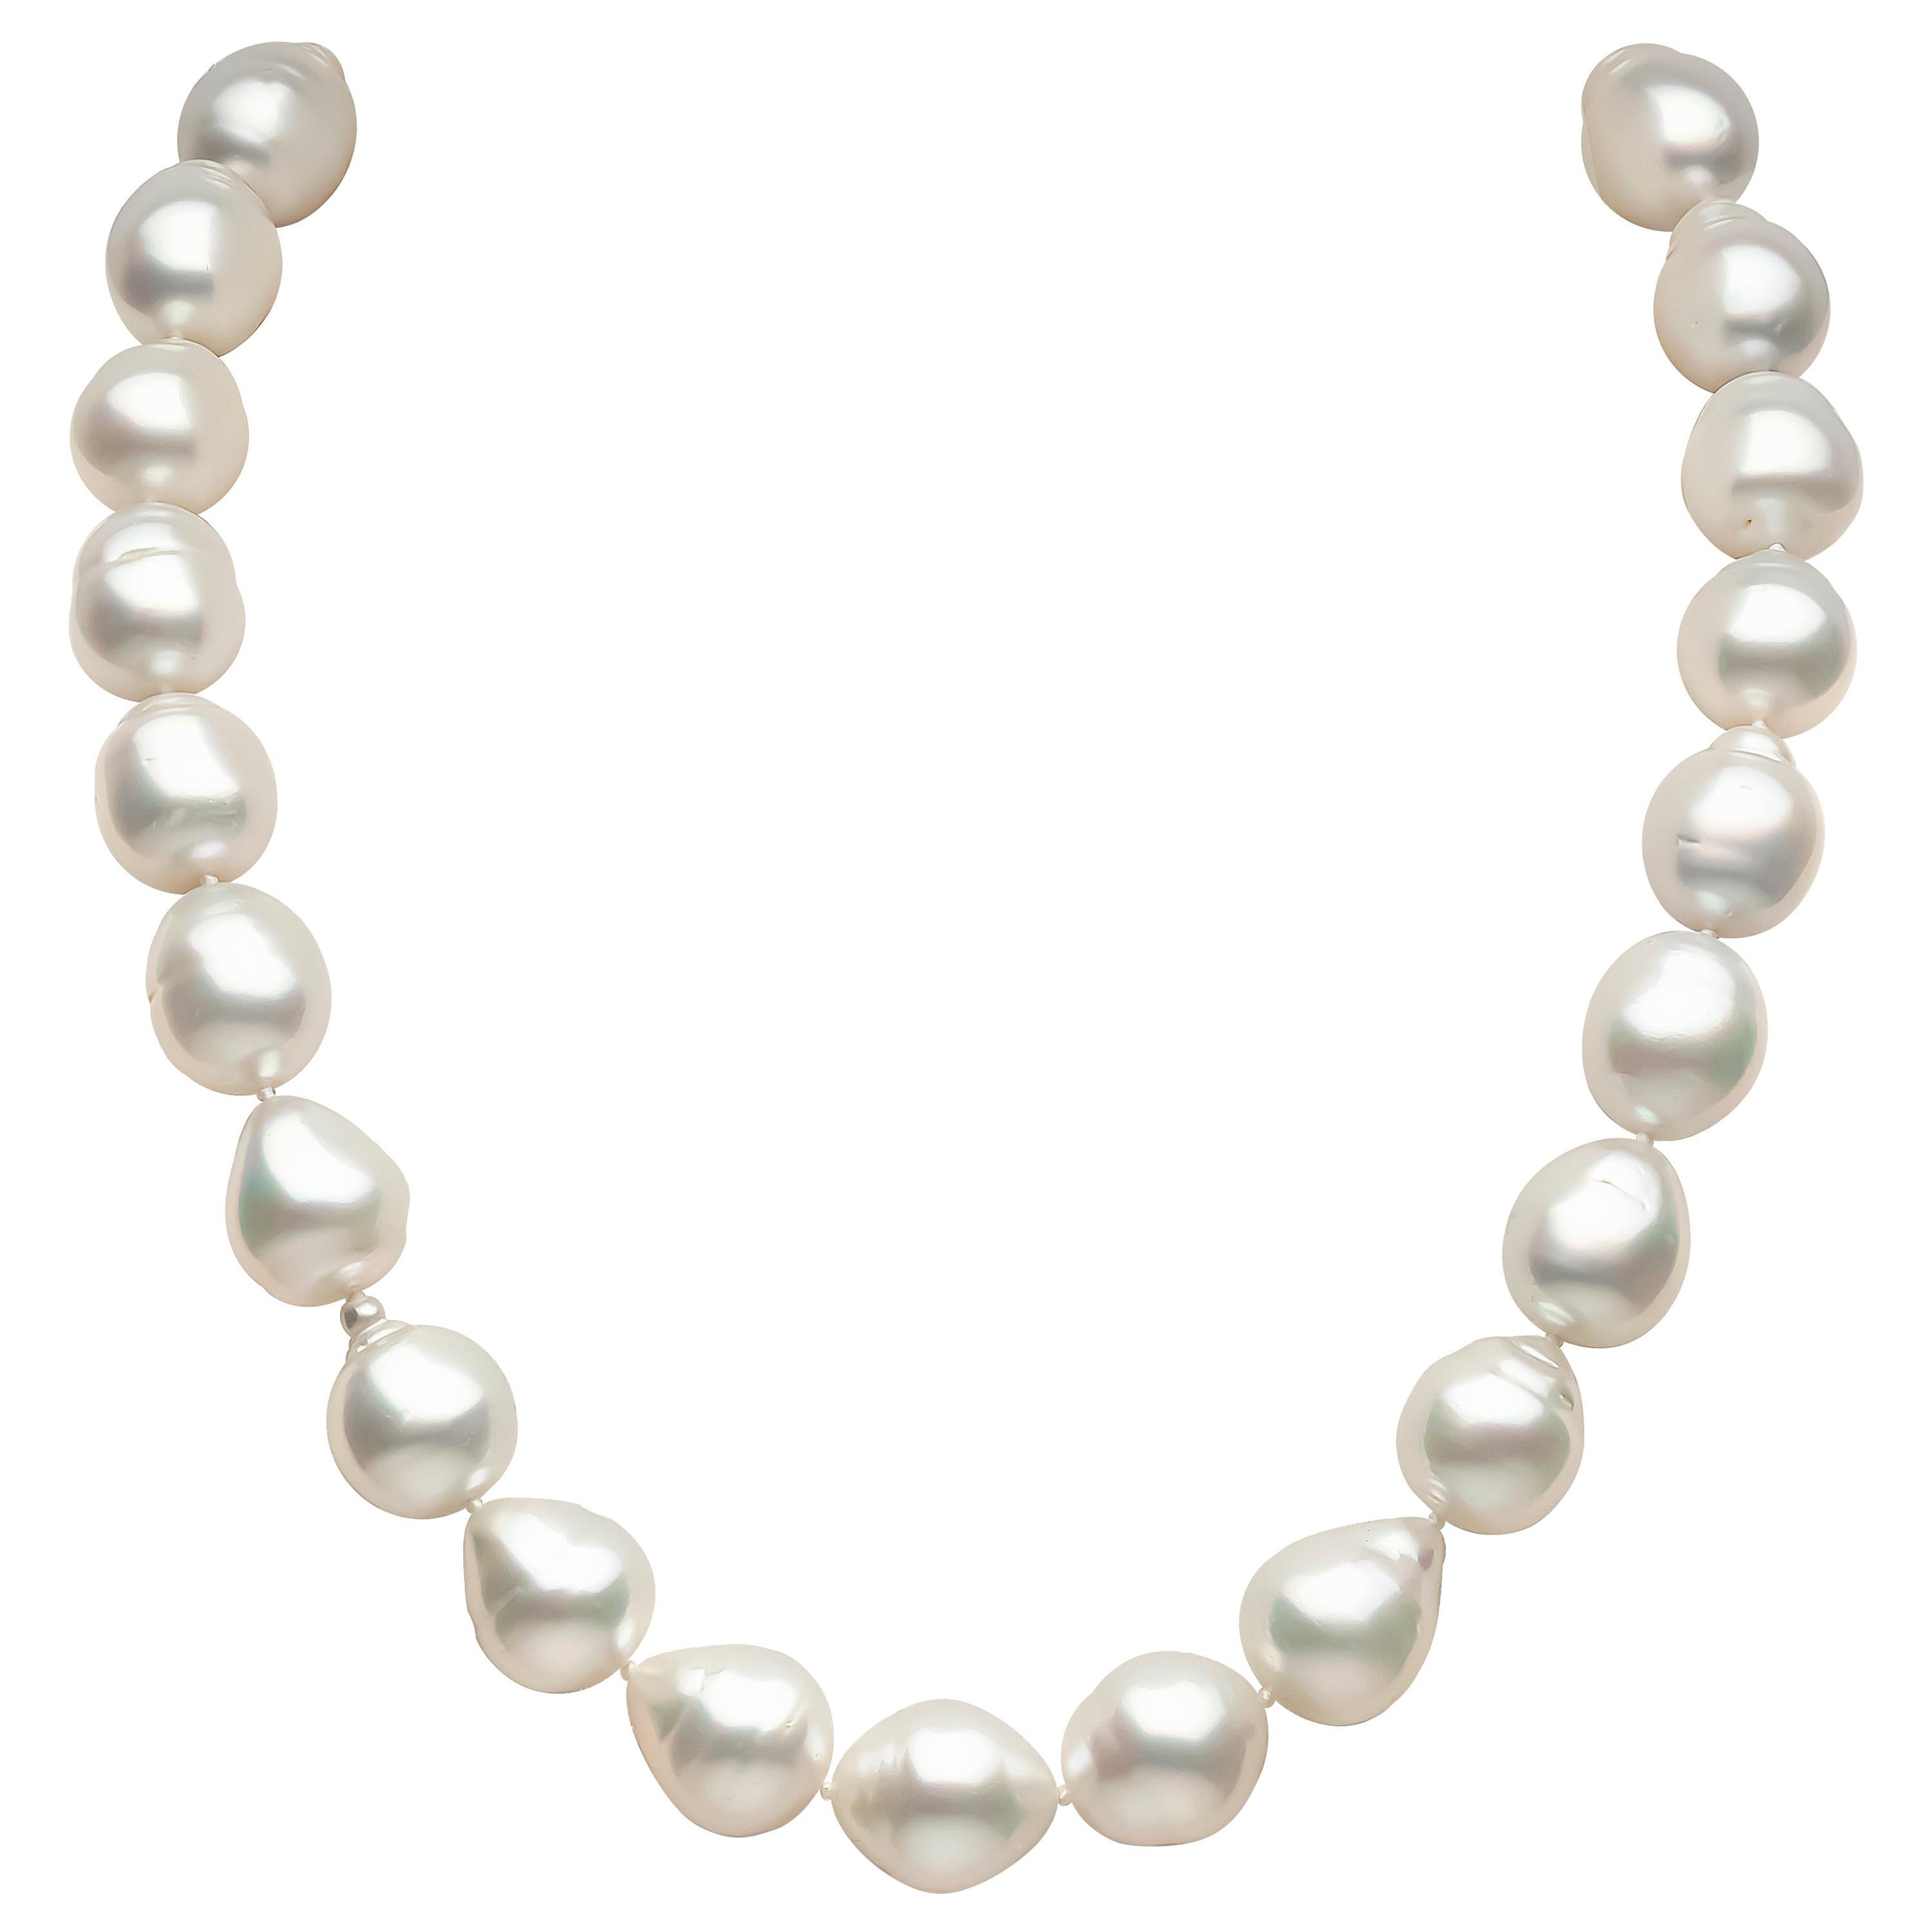 Yoko London Baroque South Sea Pearl Necklace in 18K White Gold